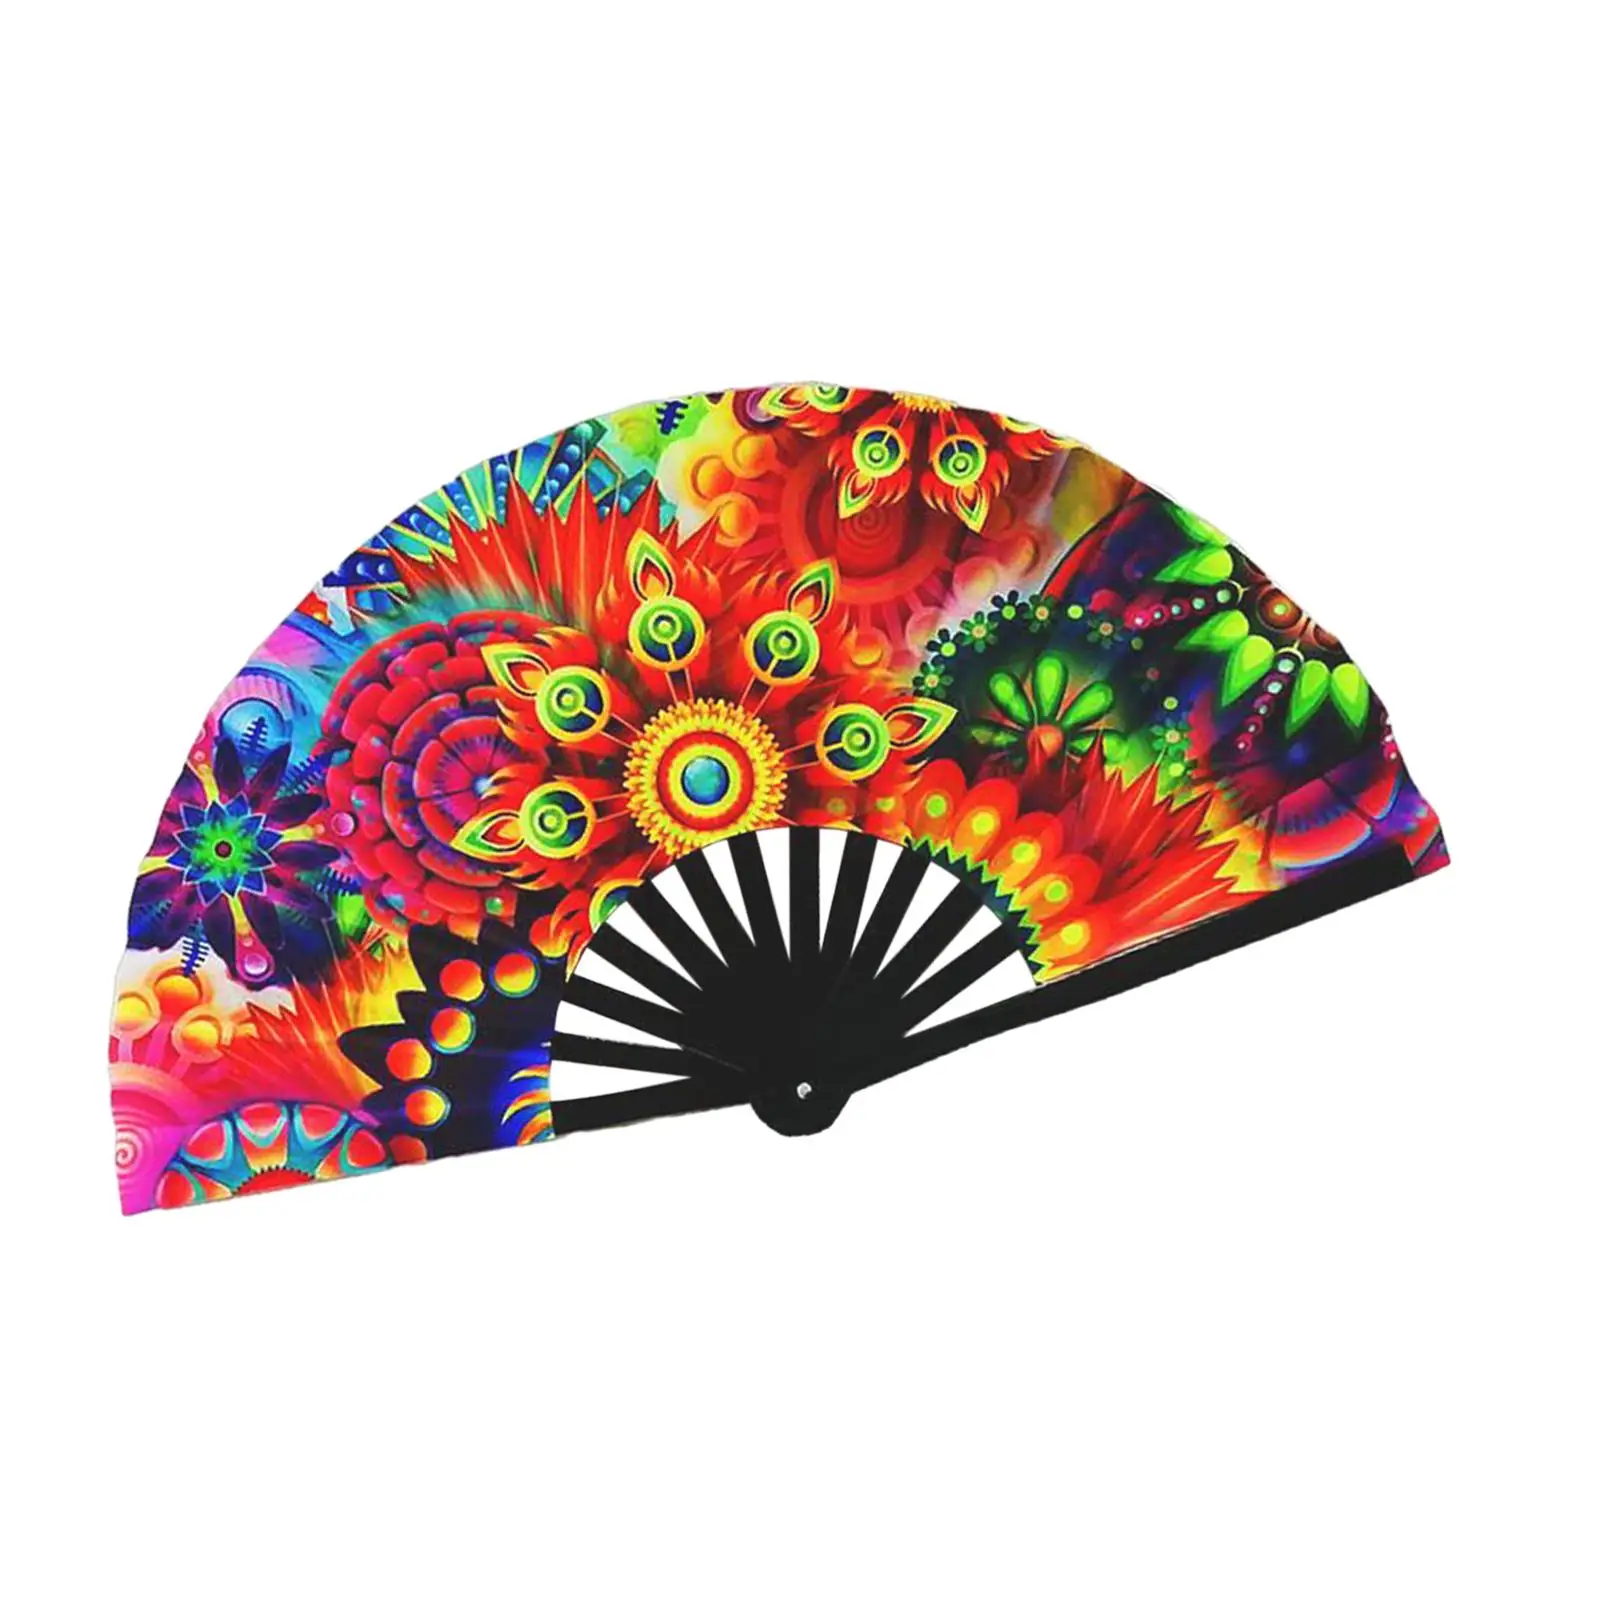 Large Rave Folding Hand Fan Fluorescent Effects Chinese Kung Fu for Roles Play Festivals Bars Party Supplies Theater